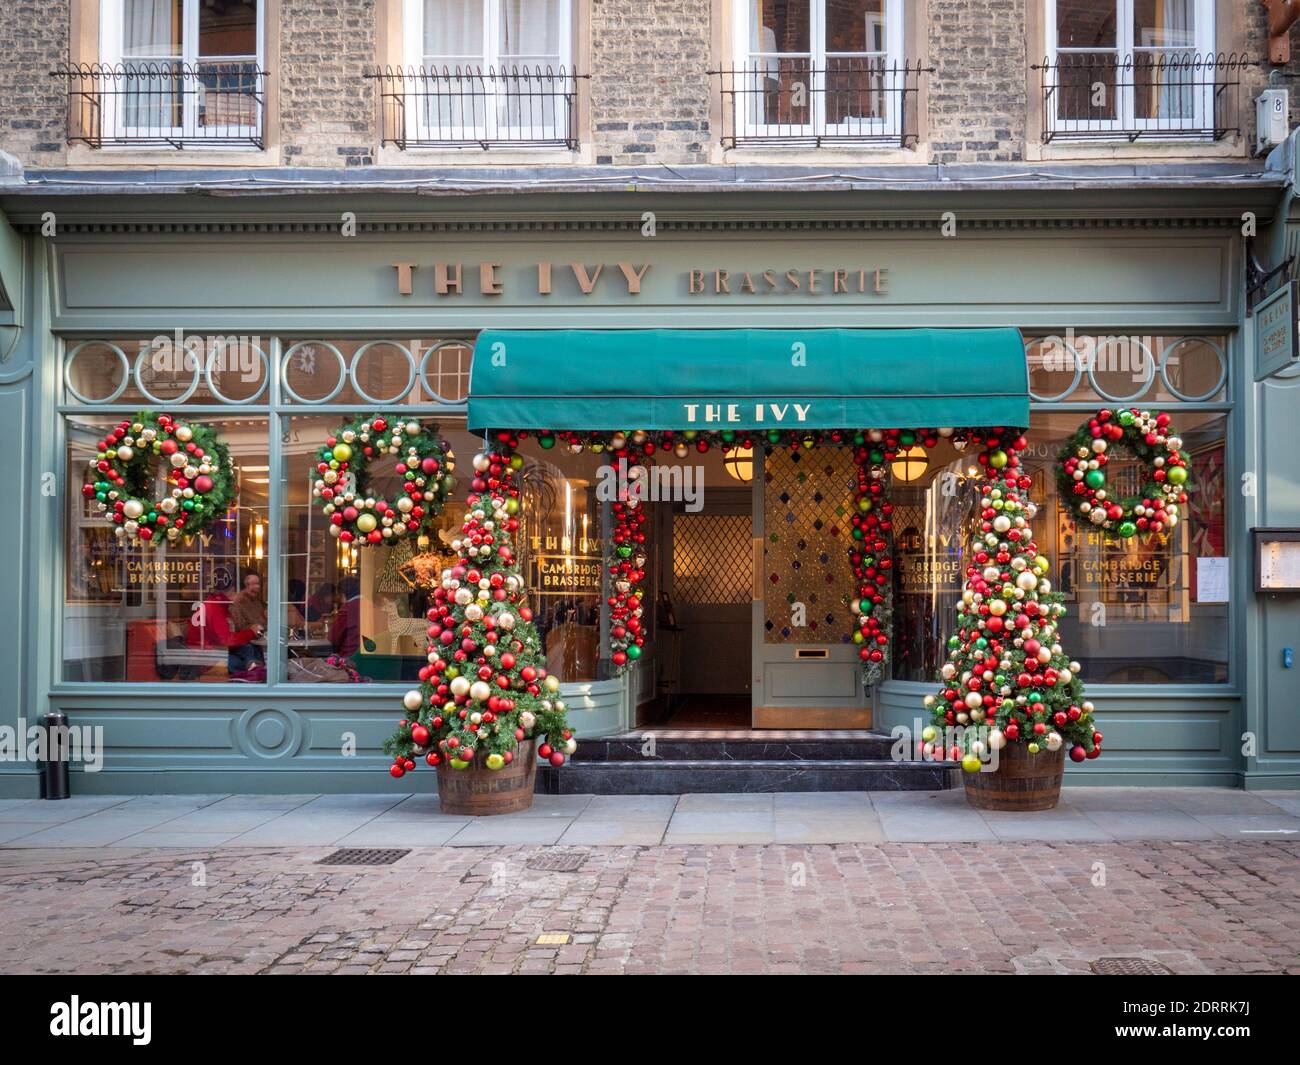 The Ivy Restaurant In Cambridge Uk With Christmas Decorations Outside 2DRRK7J 